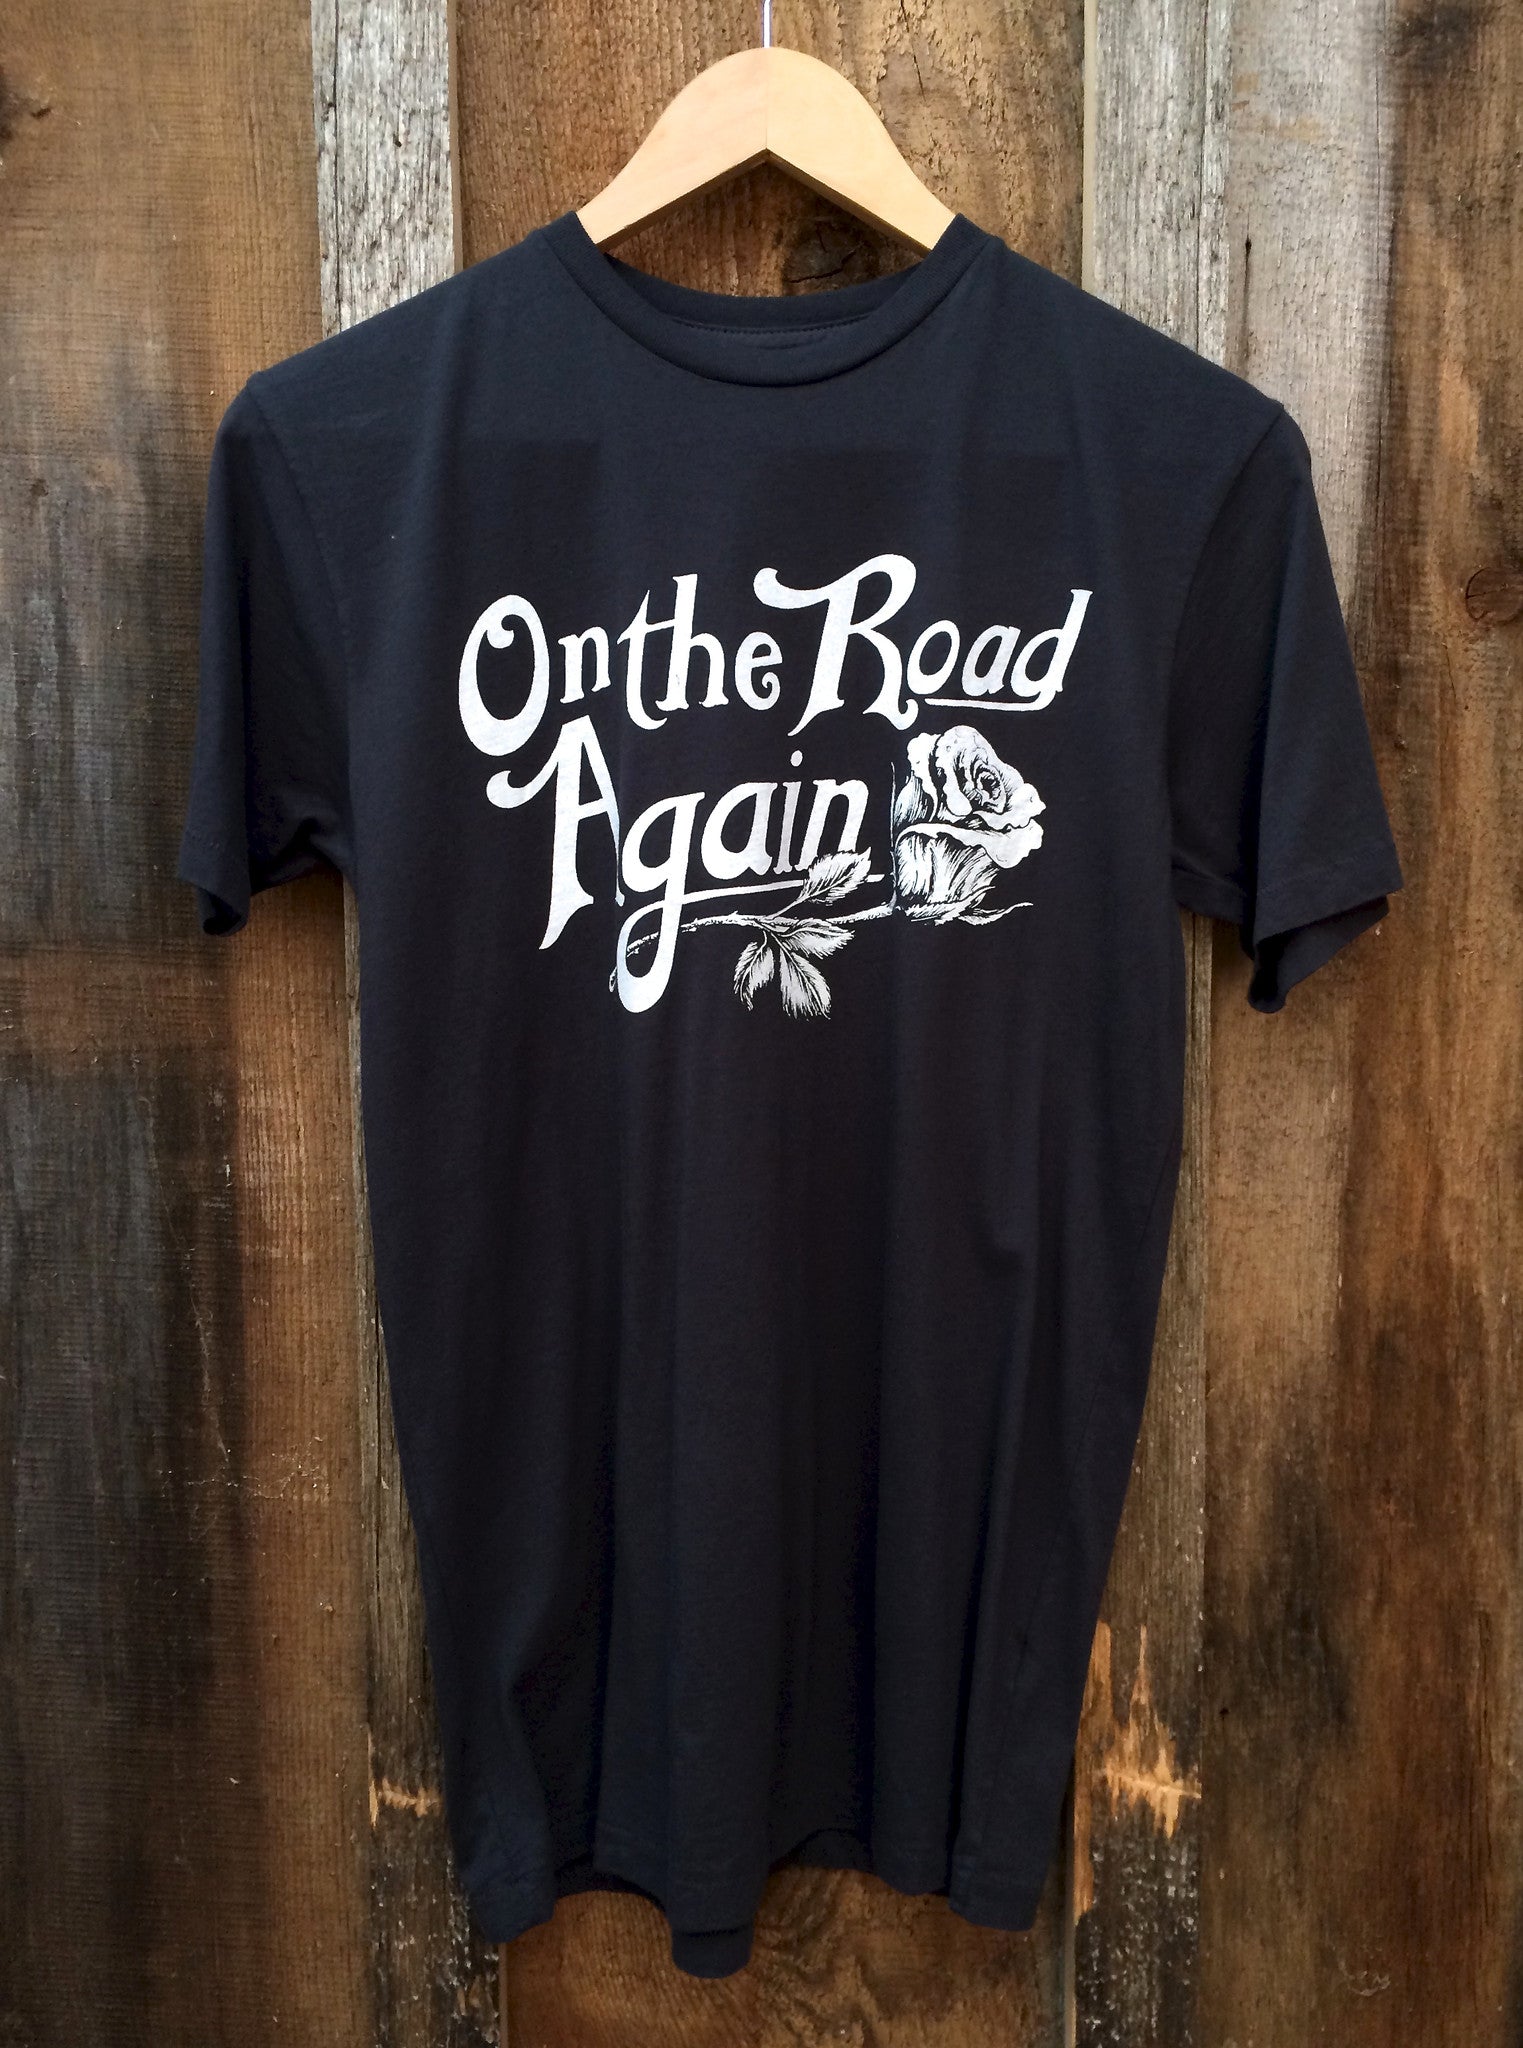 On the Road Again Mens Tee Blk/Wht